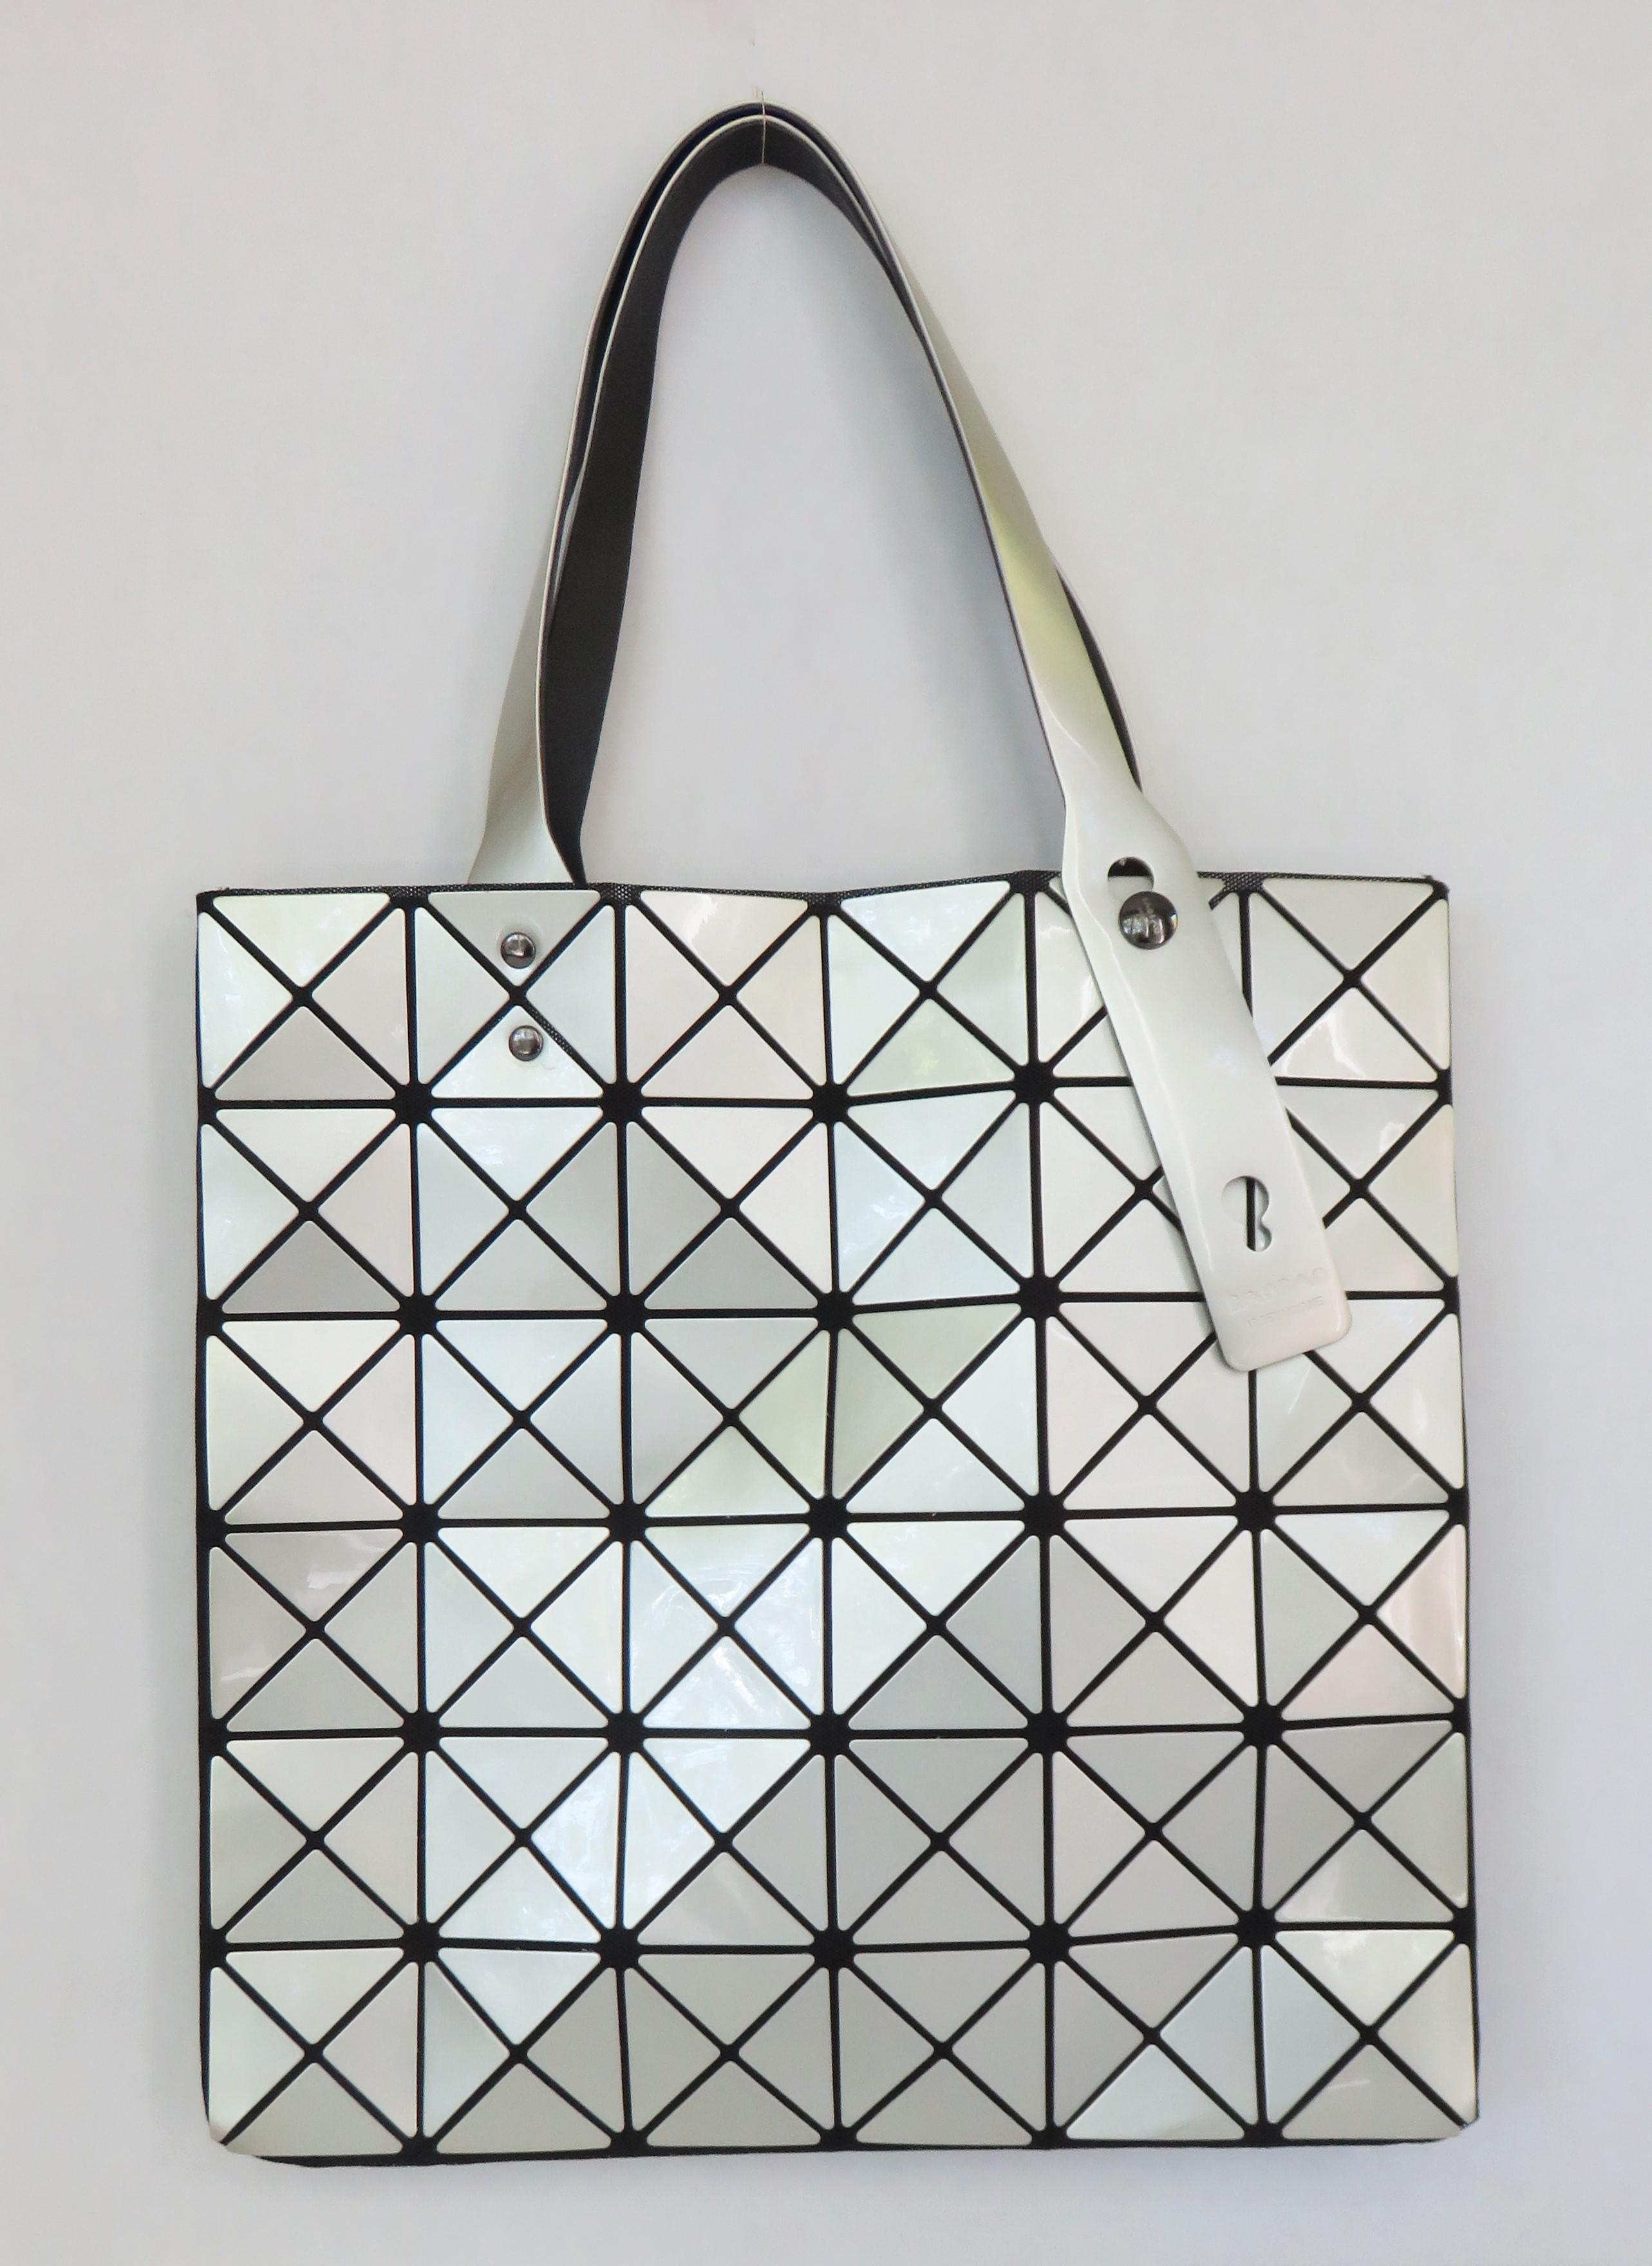 A new silver Bao Bao handbag by Issey Miyake. The bag consists of black mesh with geometric silver PVC overlay appliques, 2 top adjustable handles, an inner zipper pocket and and top zipper closure. Never used.

13.50 X 13.50